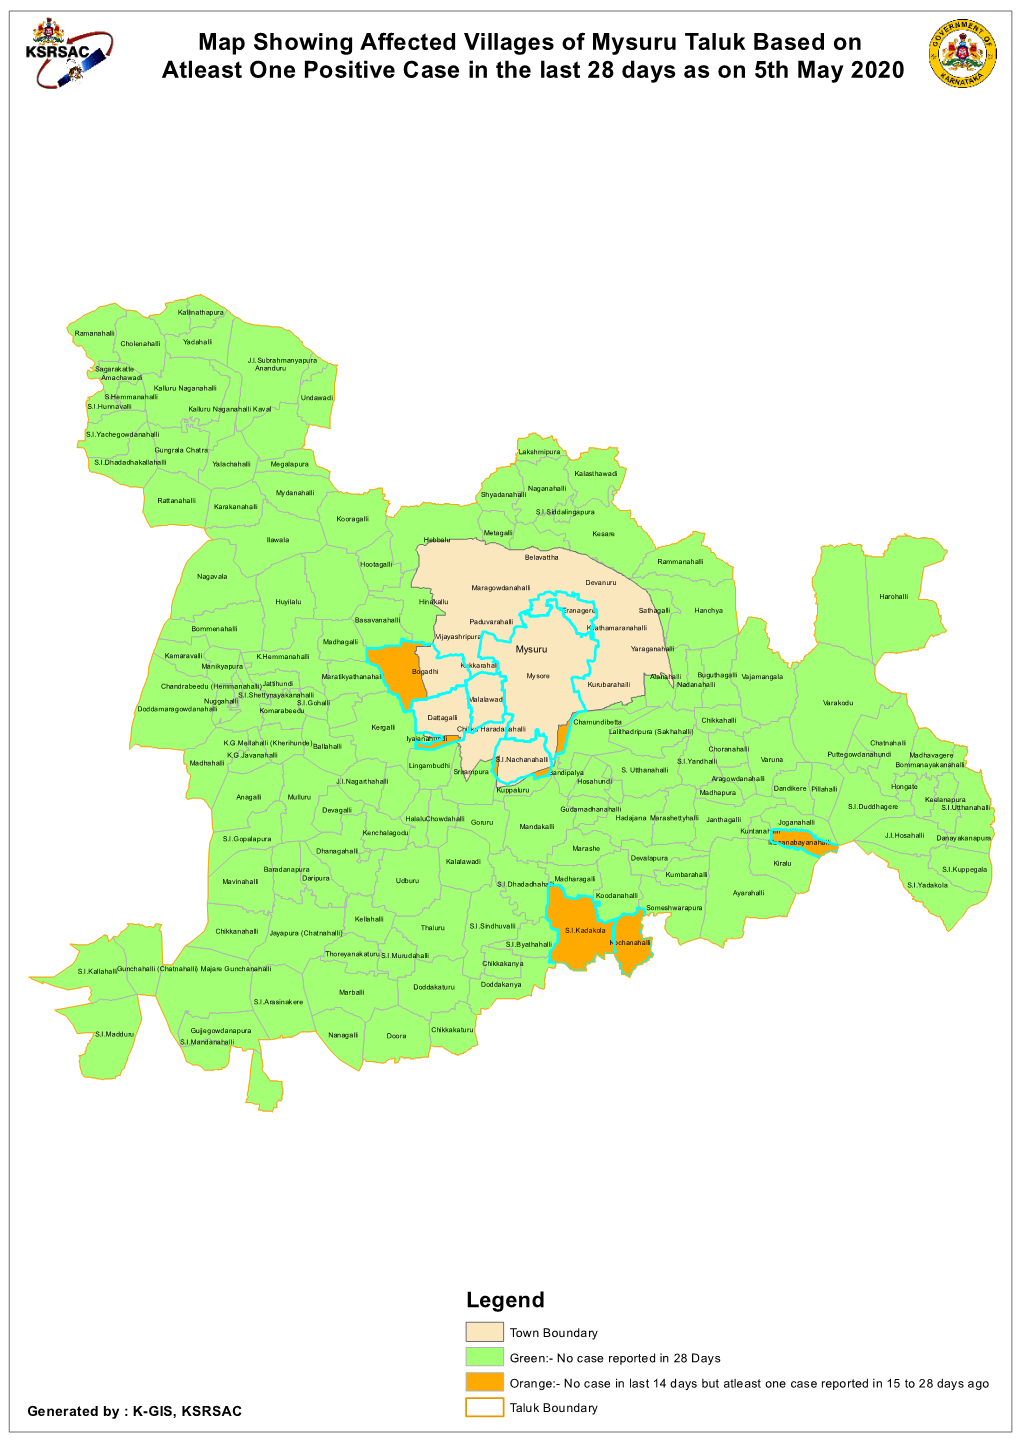 Map Showing Affected Villages of Mysuru Taluk Based on Atleast One Positive Case in the Last 28 Days As on 5Th May 2020